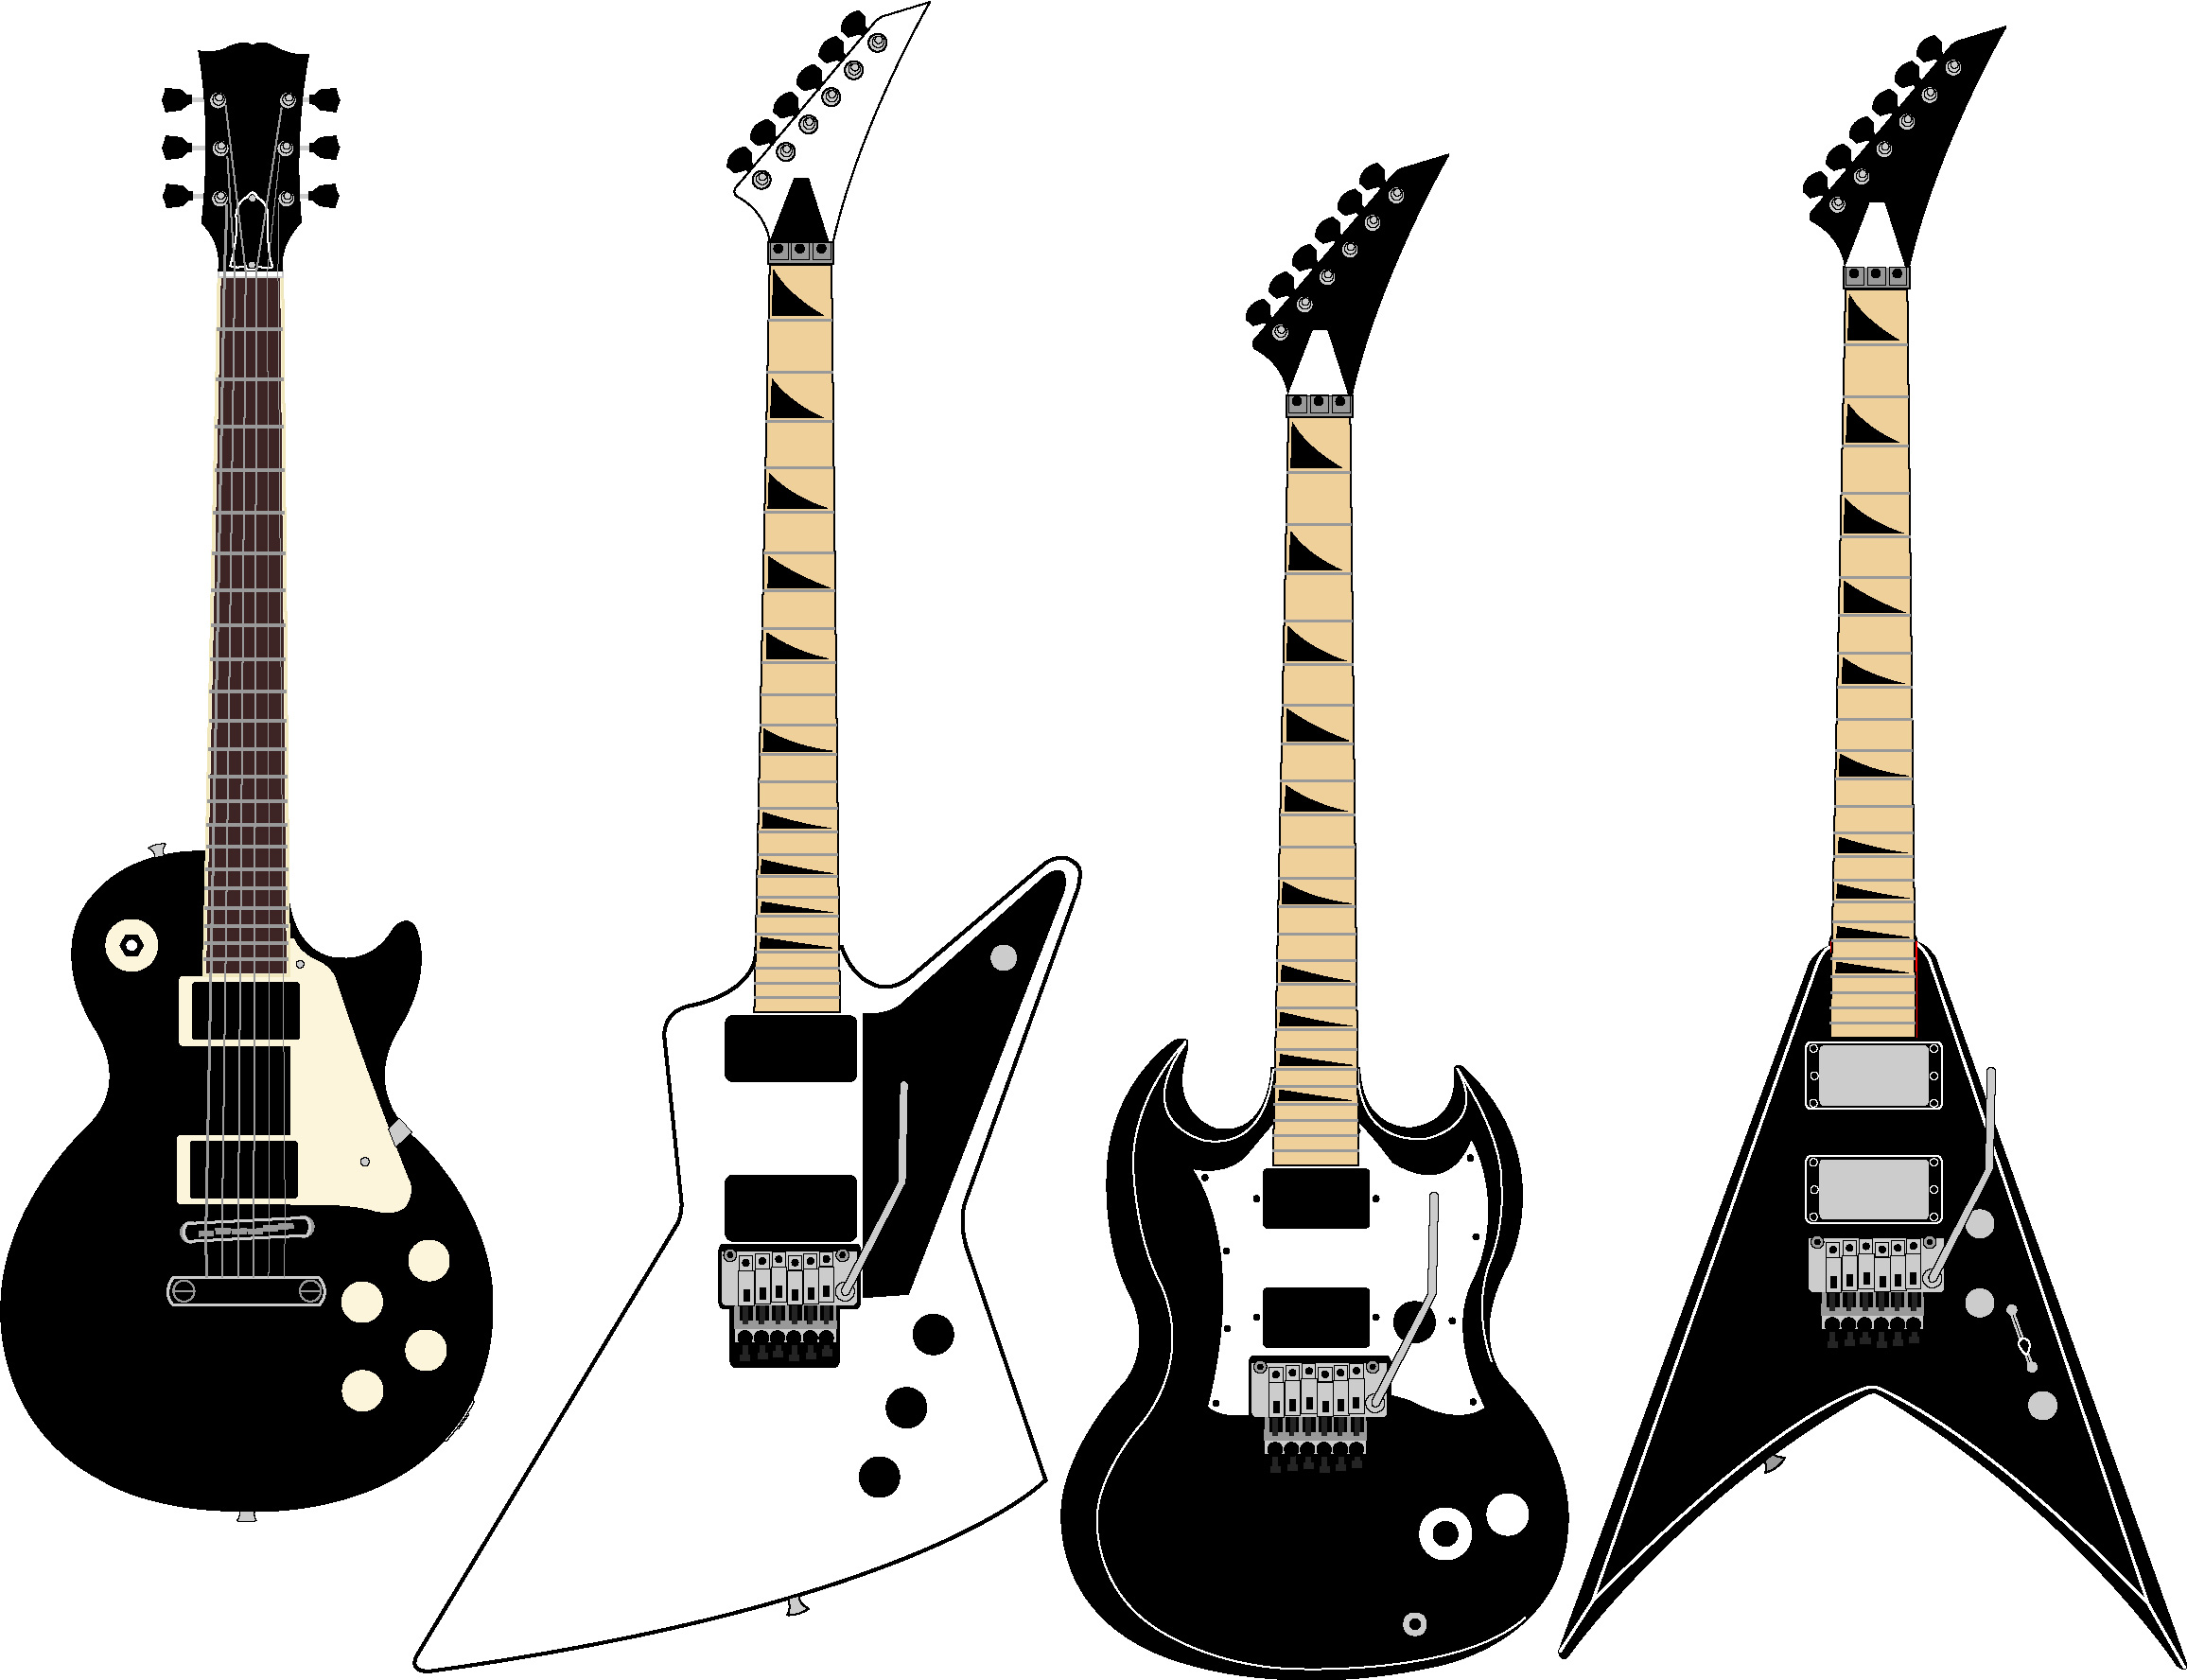 Clip Arts Related To : Electric guitar. view all Guitar Vector). 